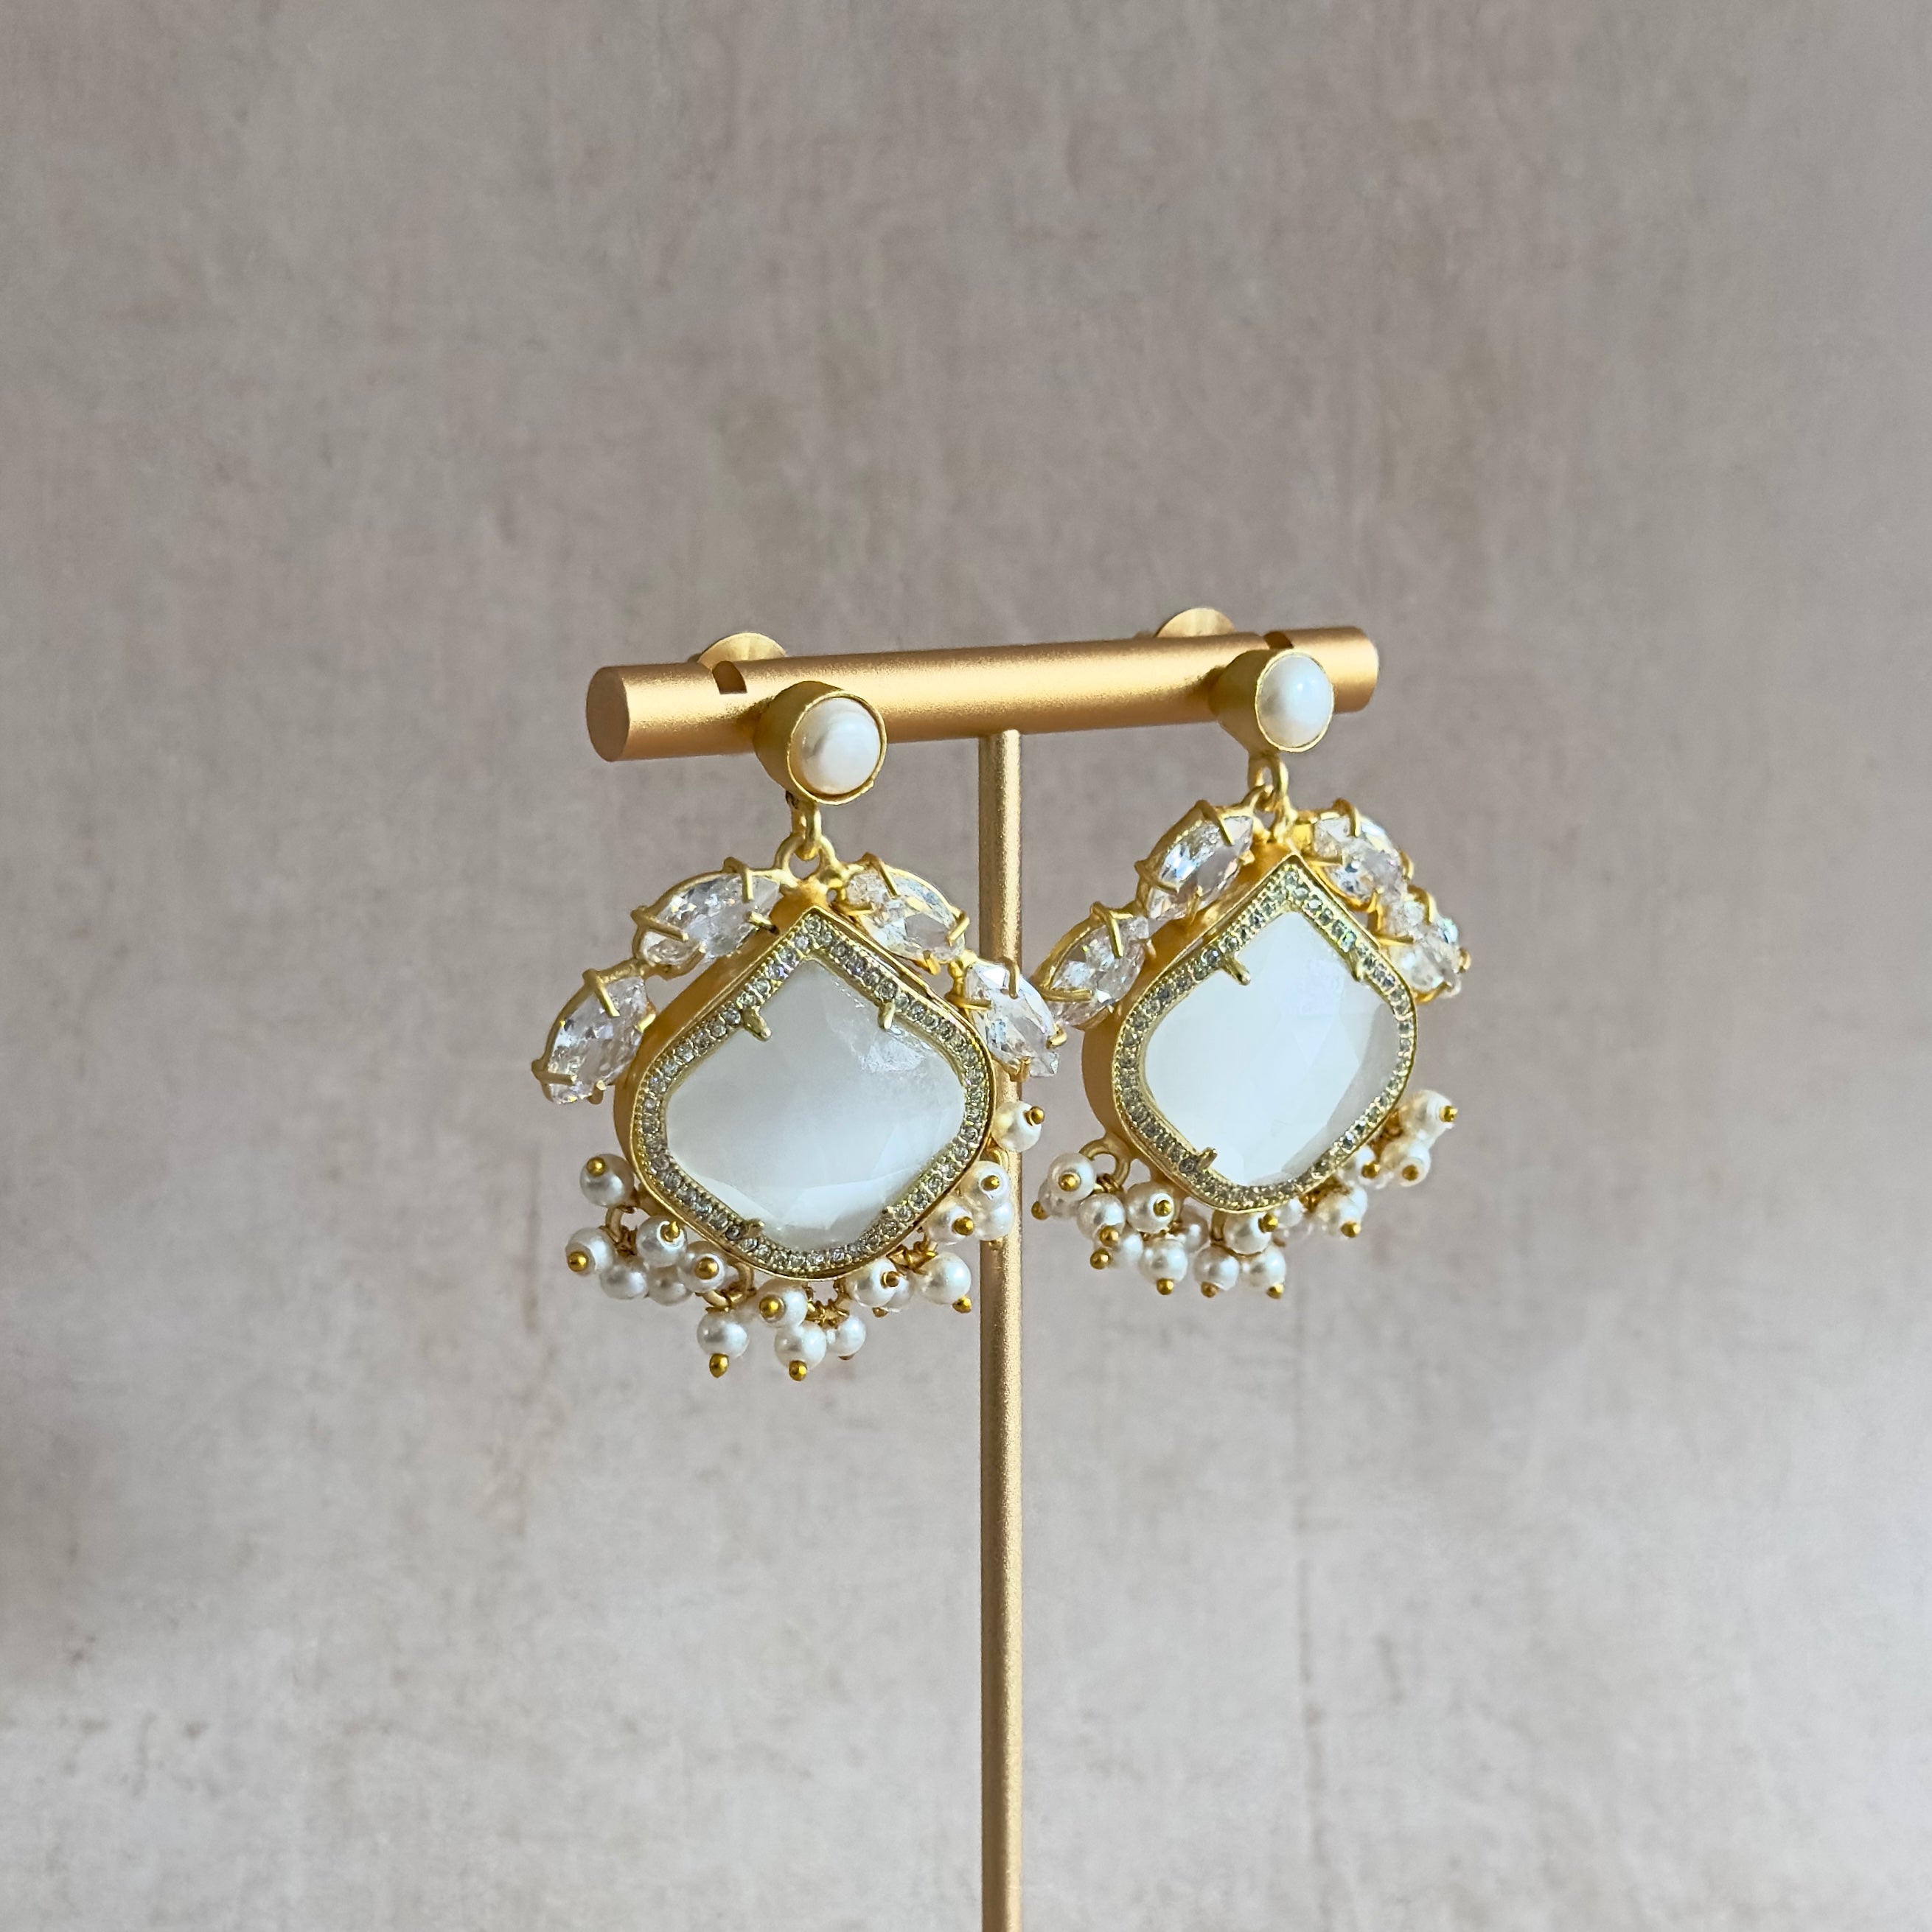 Elevate your style with our Kaia Grey Pearl Drop Earrings! The grey stones, crystal details, and pearl accent add a touch of elegance to any outfit. Perfect for any occasion.